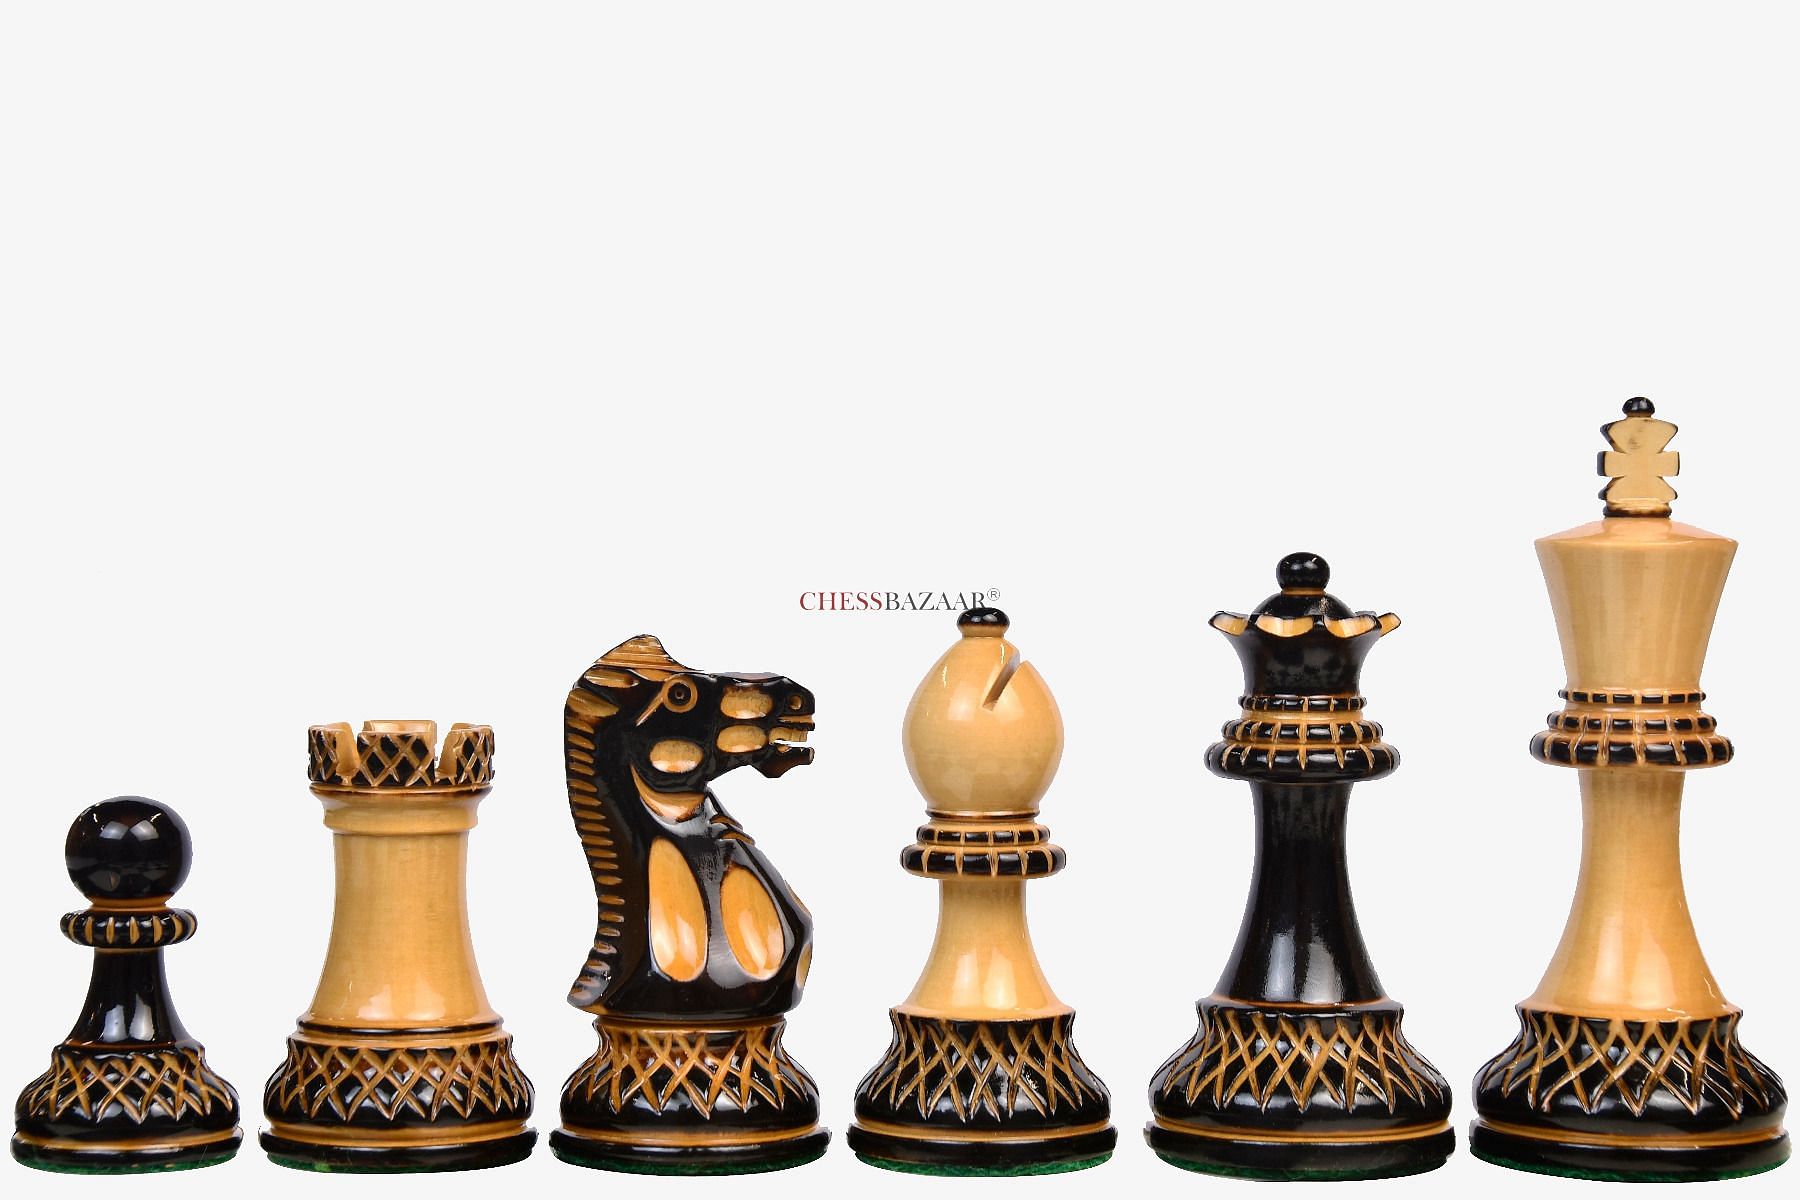 Parker Staunton Chess Set Burnt Boxwood Pieces with Black Ash Burl Chess  Board - 3.75 King